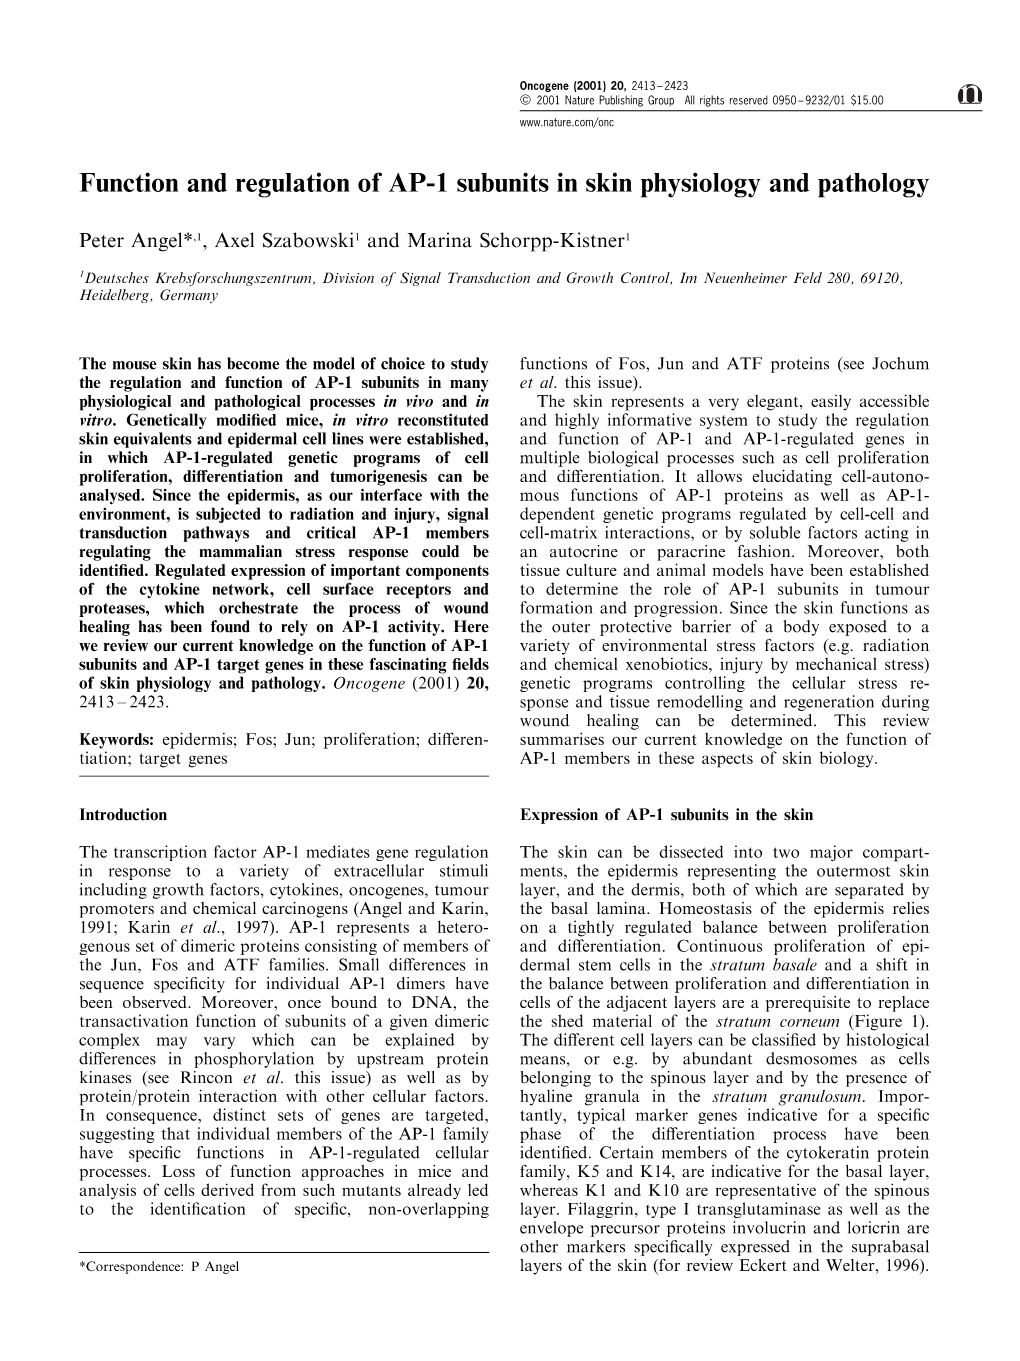 Function and Regulation of AP-1 Subunits in Skin Physiology and Pathology